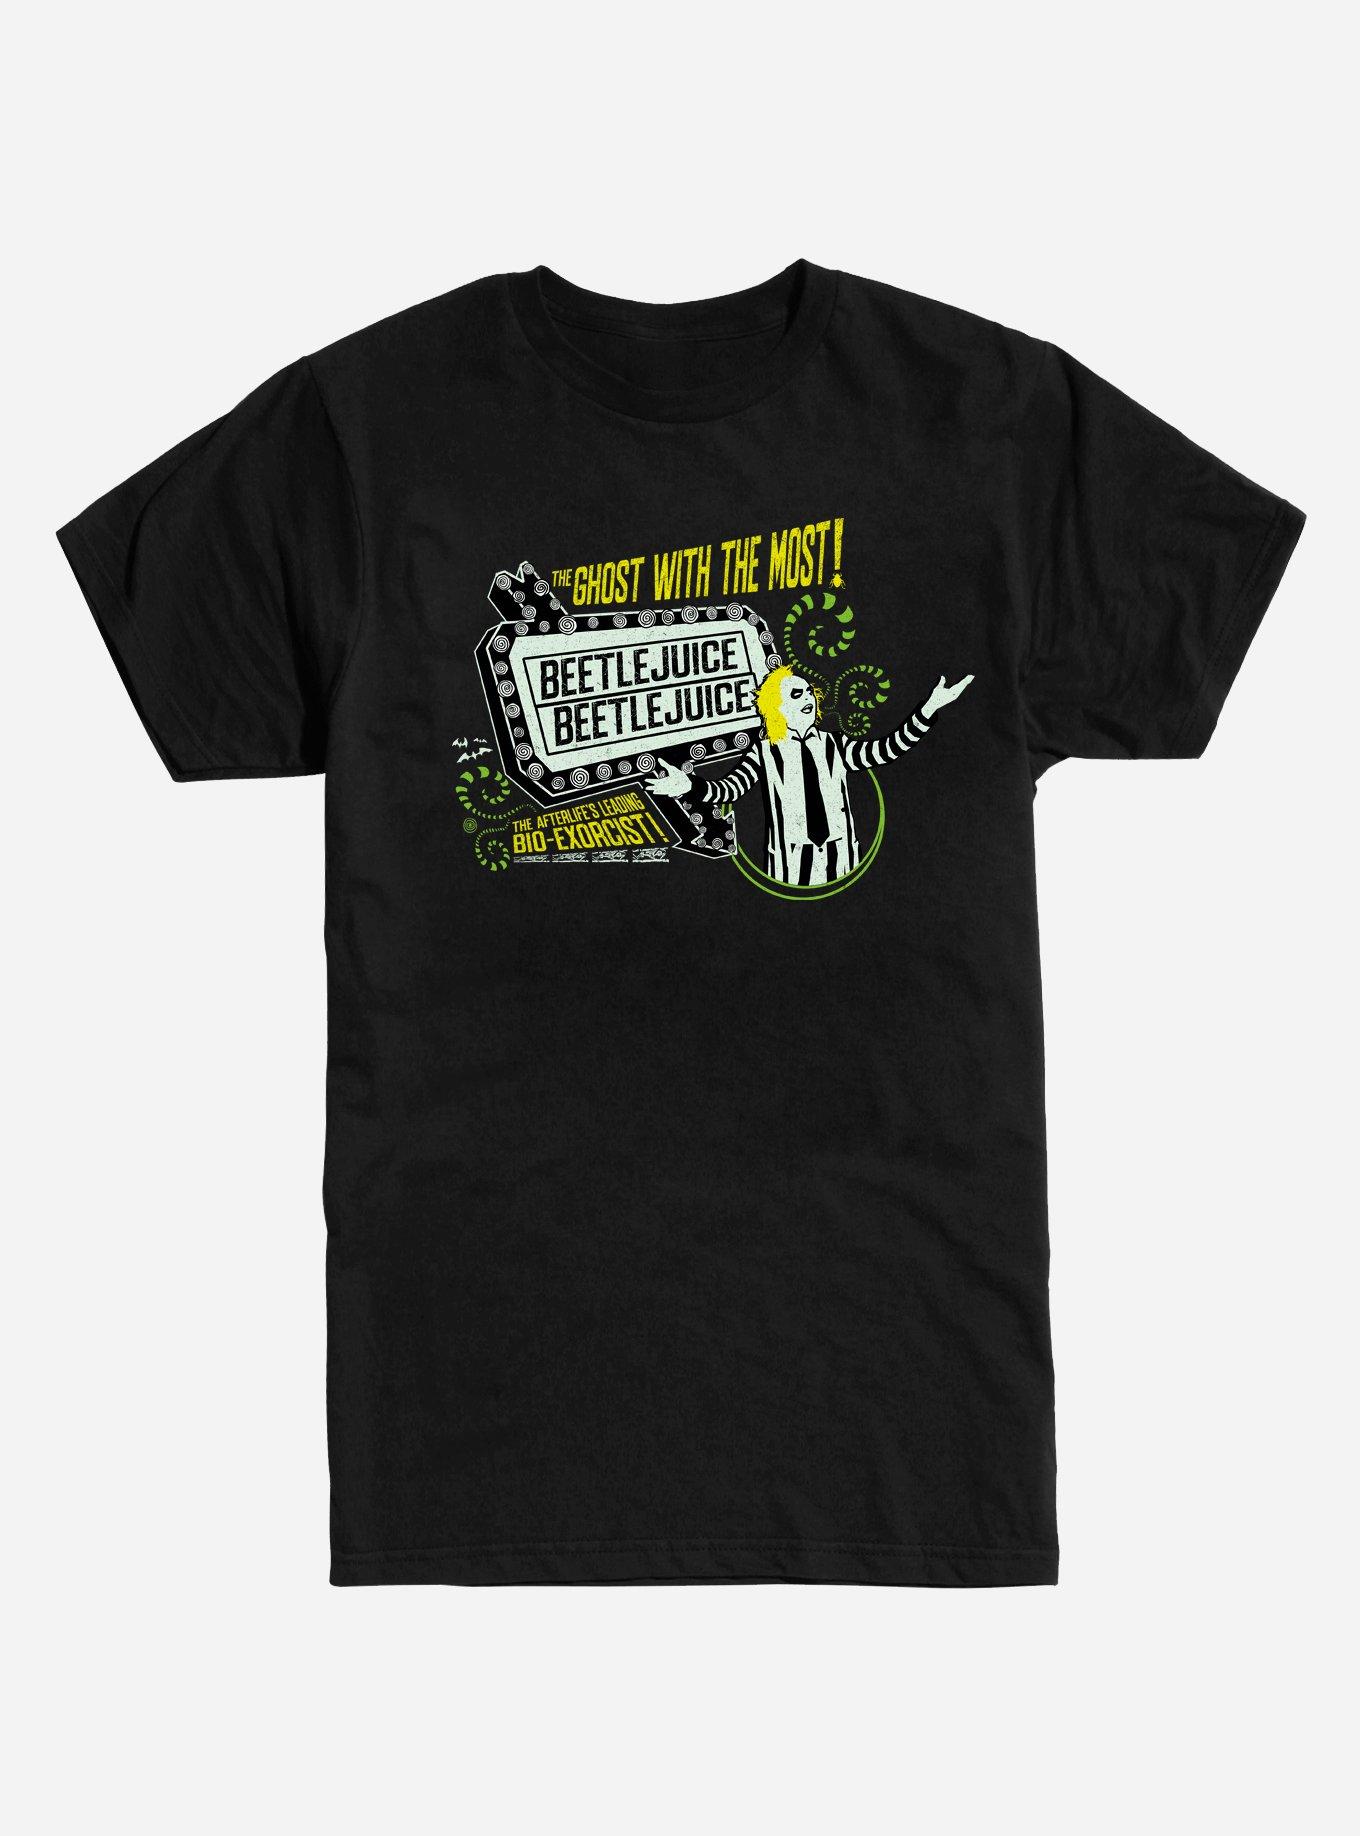 Beetlejuice Ghost With Most T-Shirt, BLACK, hi-res